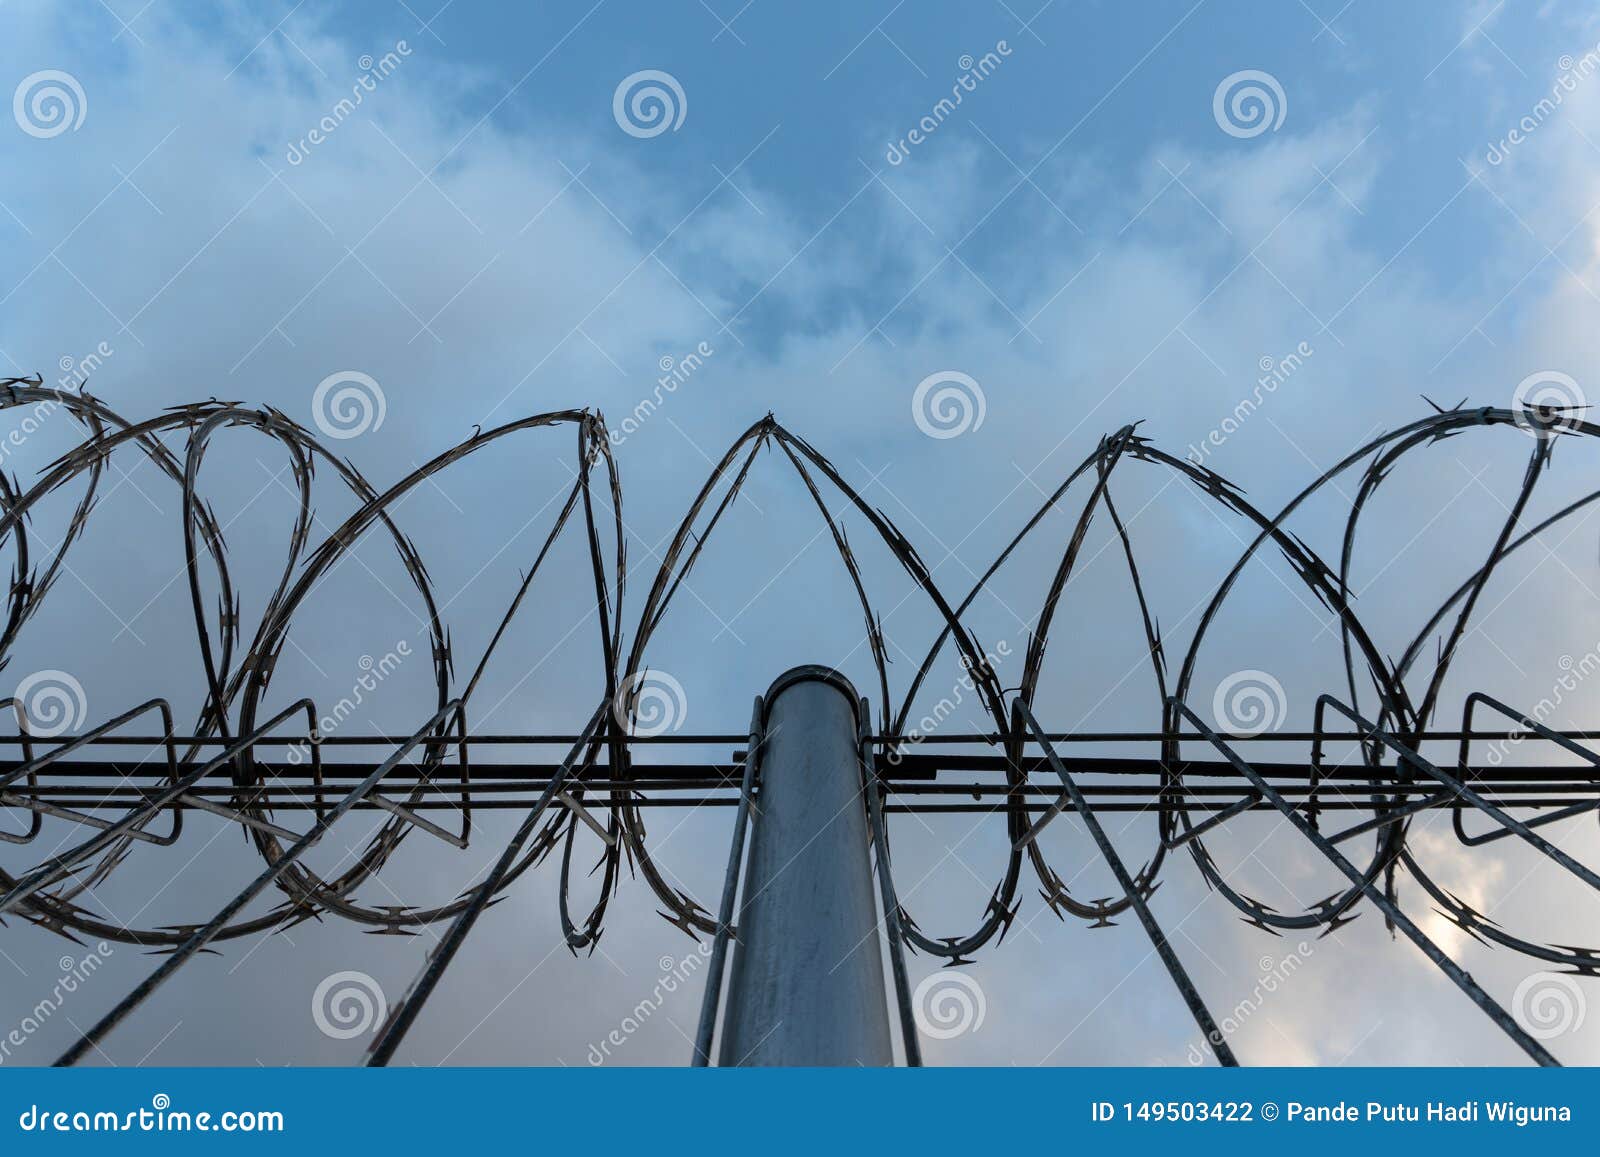 Barbed Wire Fence With Bright Blue Sky To Feel Silent And Lonely And ...
